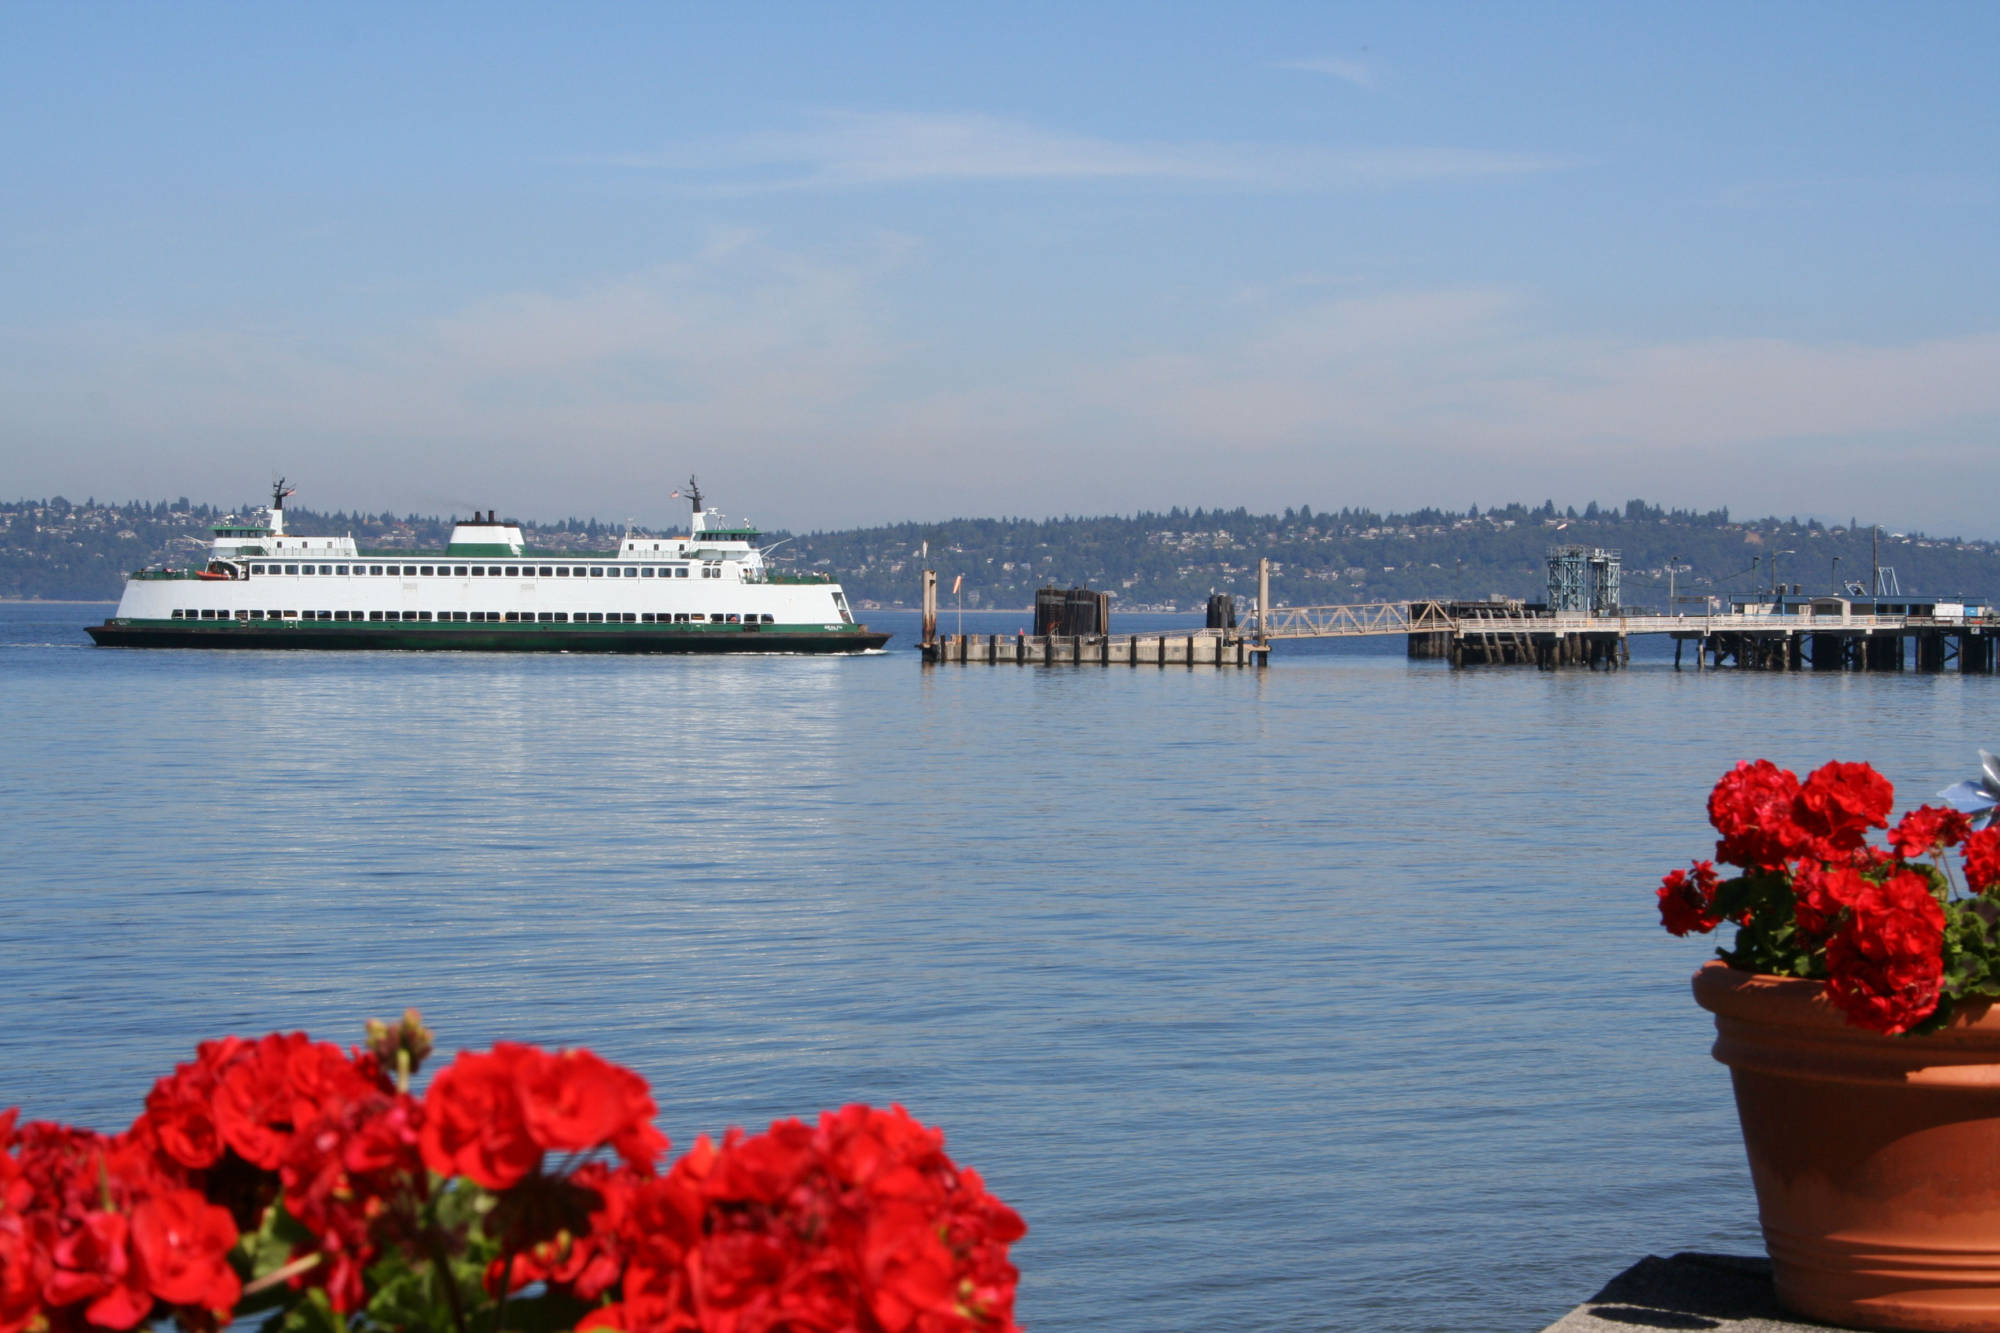 Vashon Island is a short cruise away by ferry from Kent, Washington